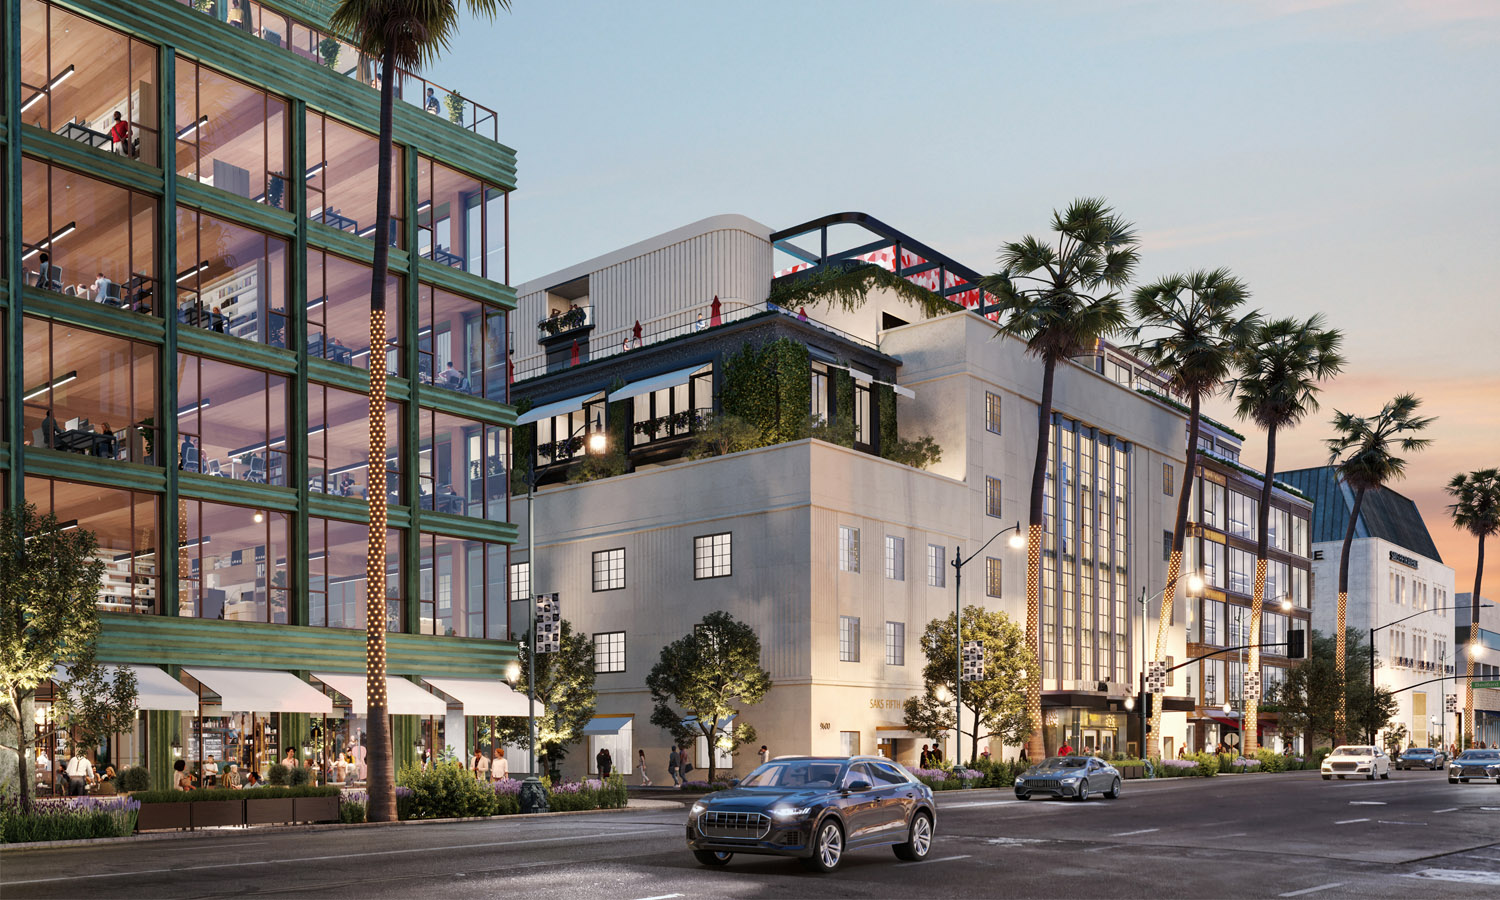 Saks Expansion Project for Beverly Hills Unveiled - Beverly Hills